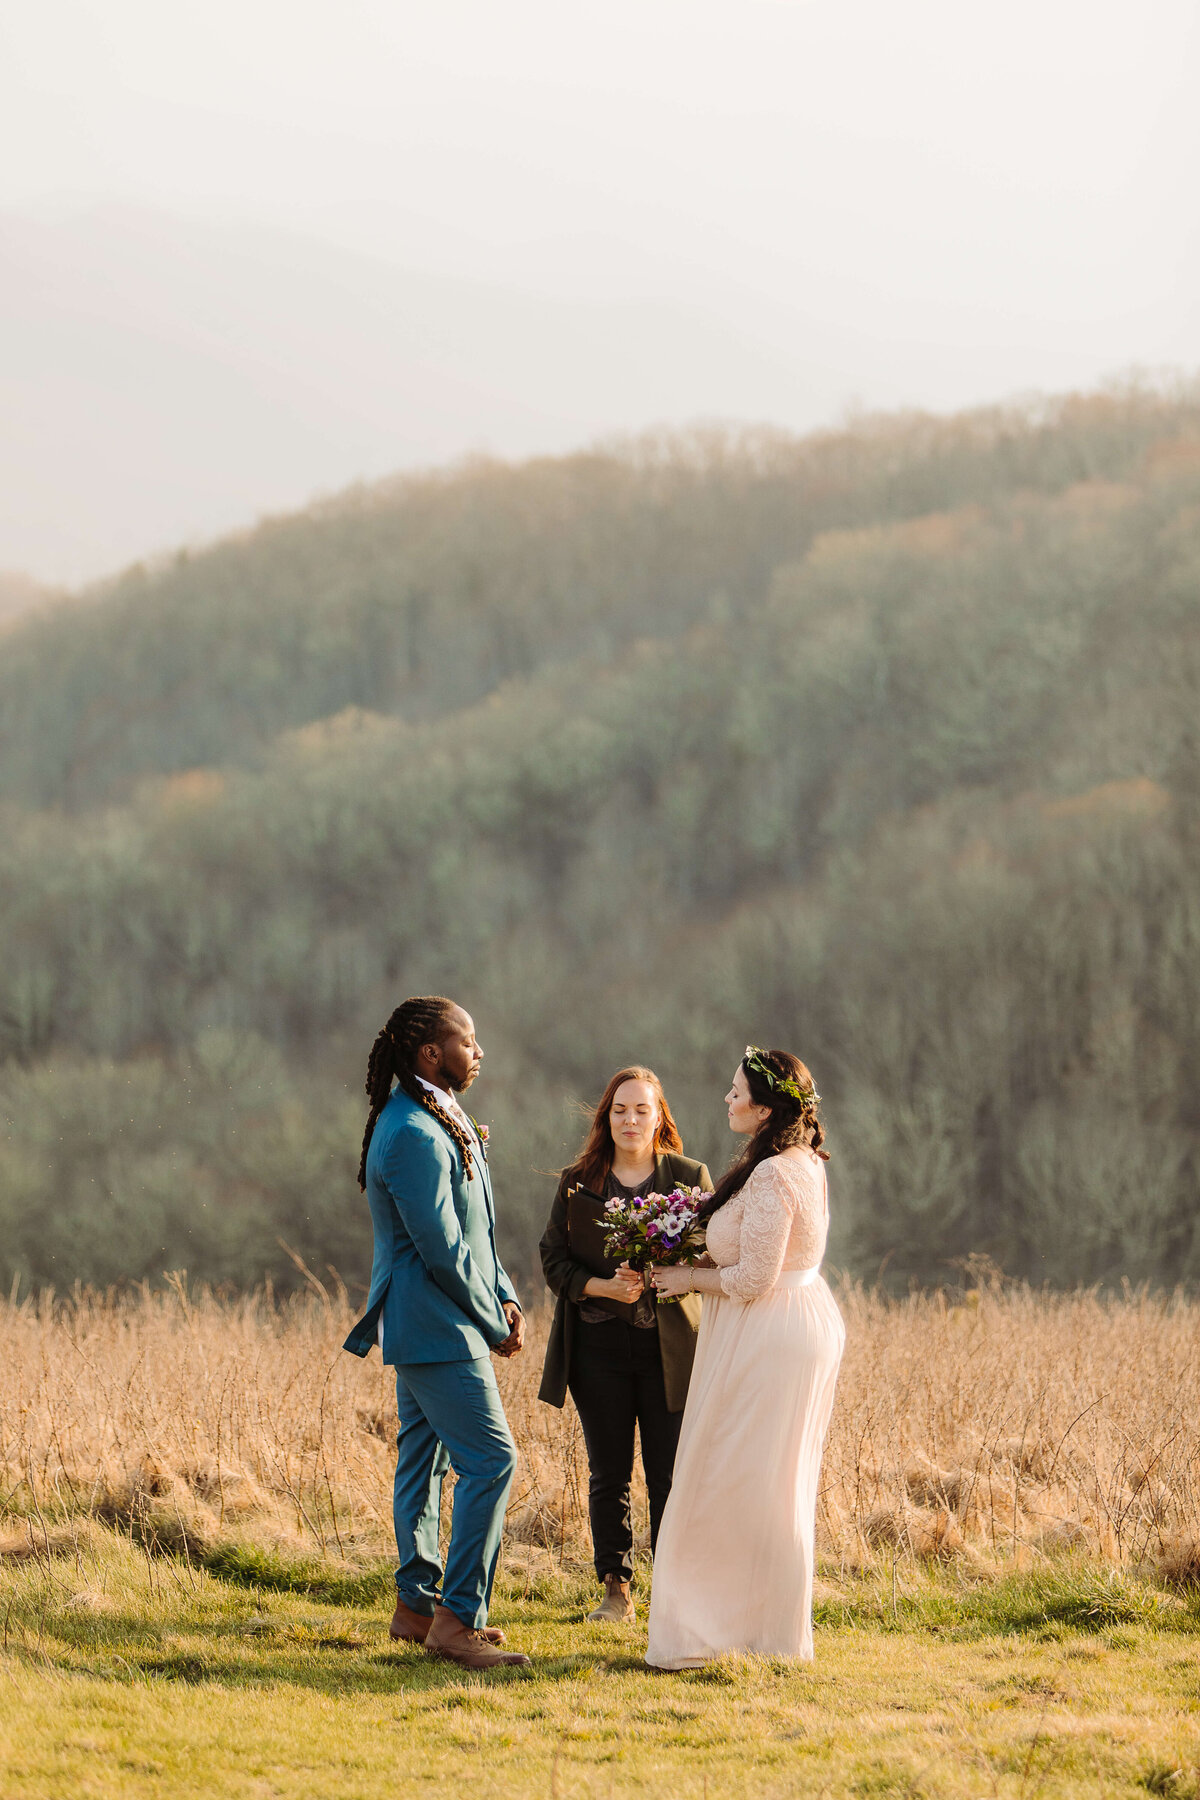 Max-Patch-Sunset-Mountain-Elopement-11